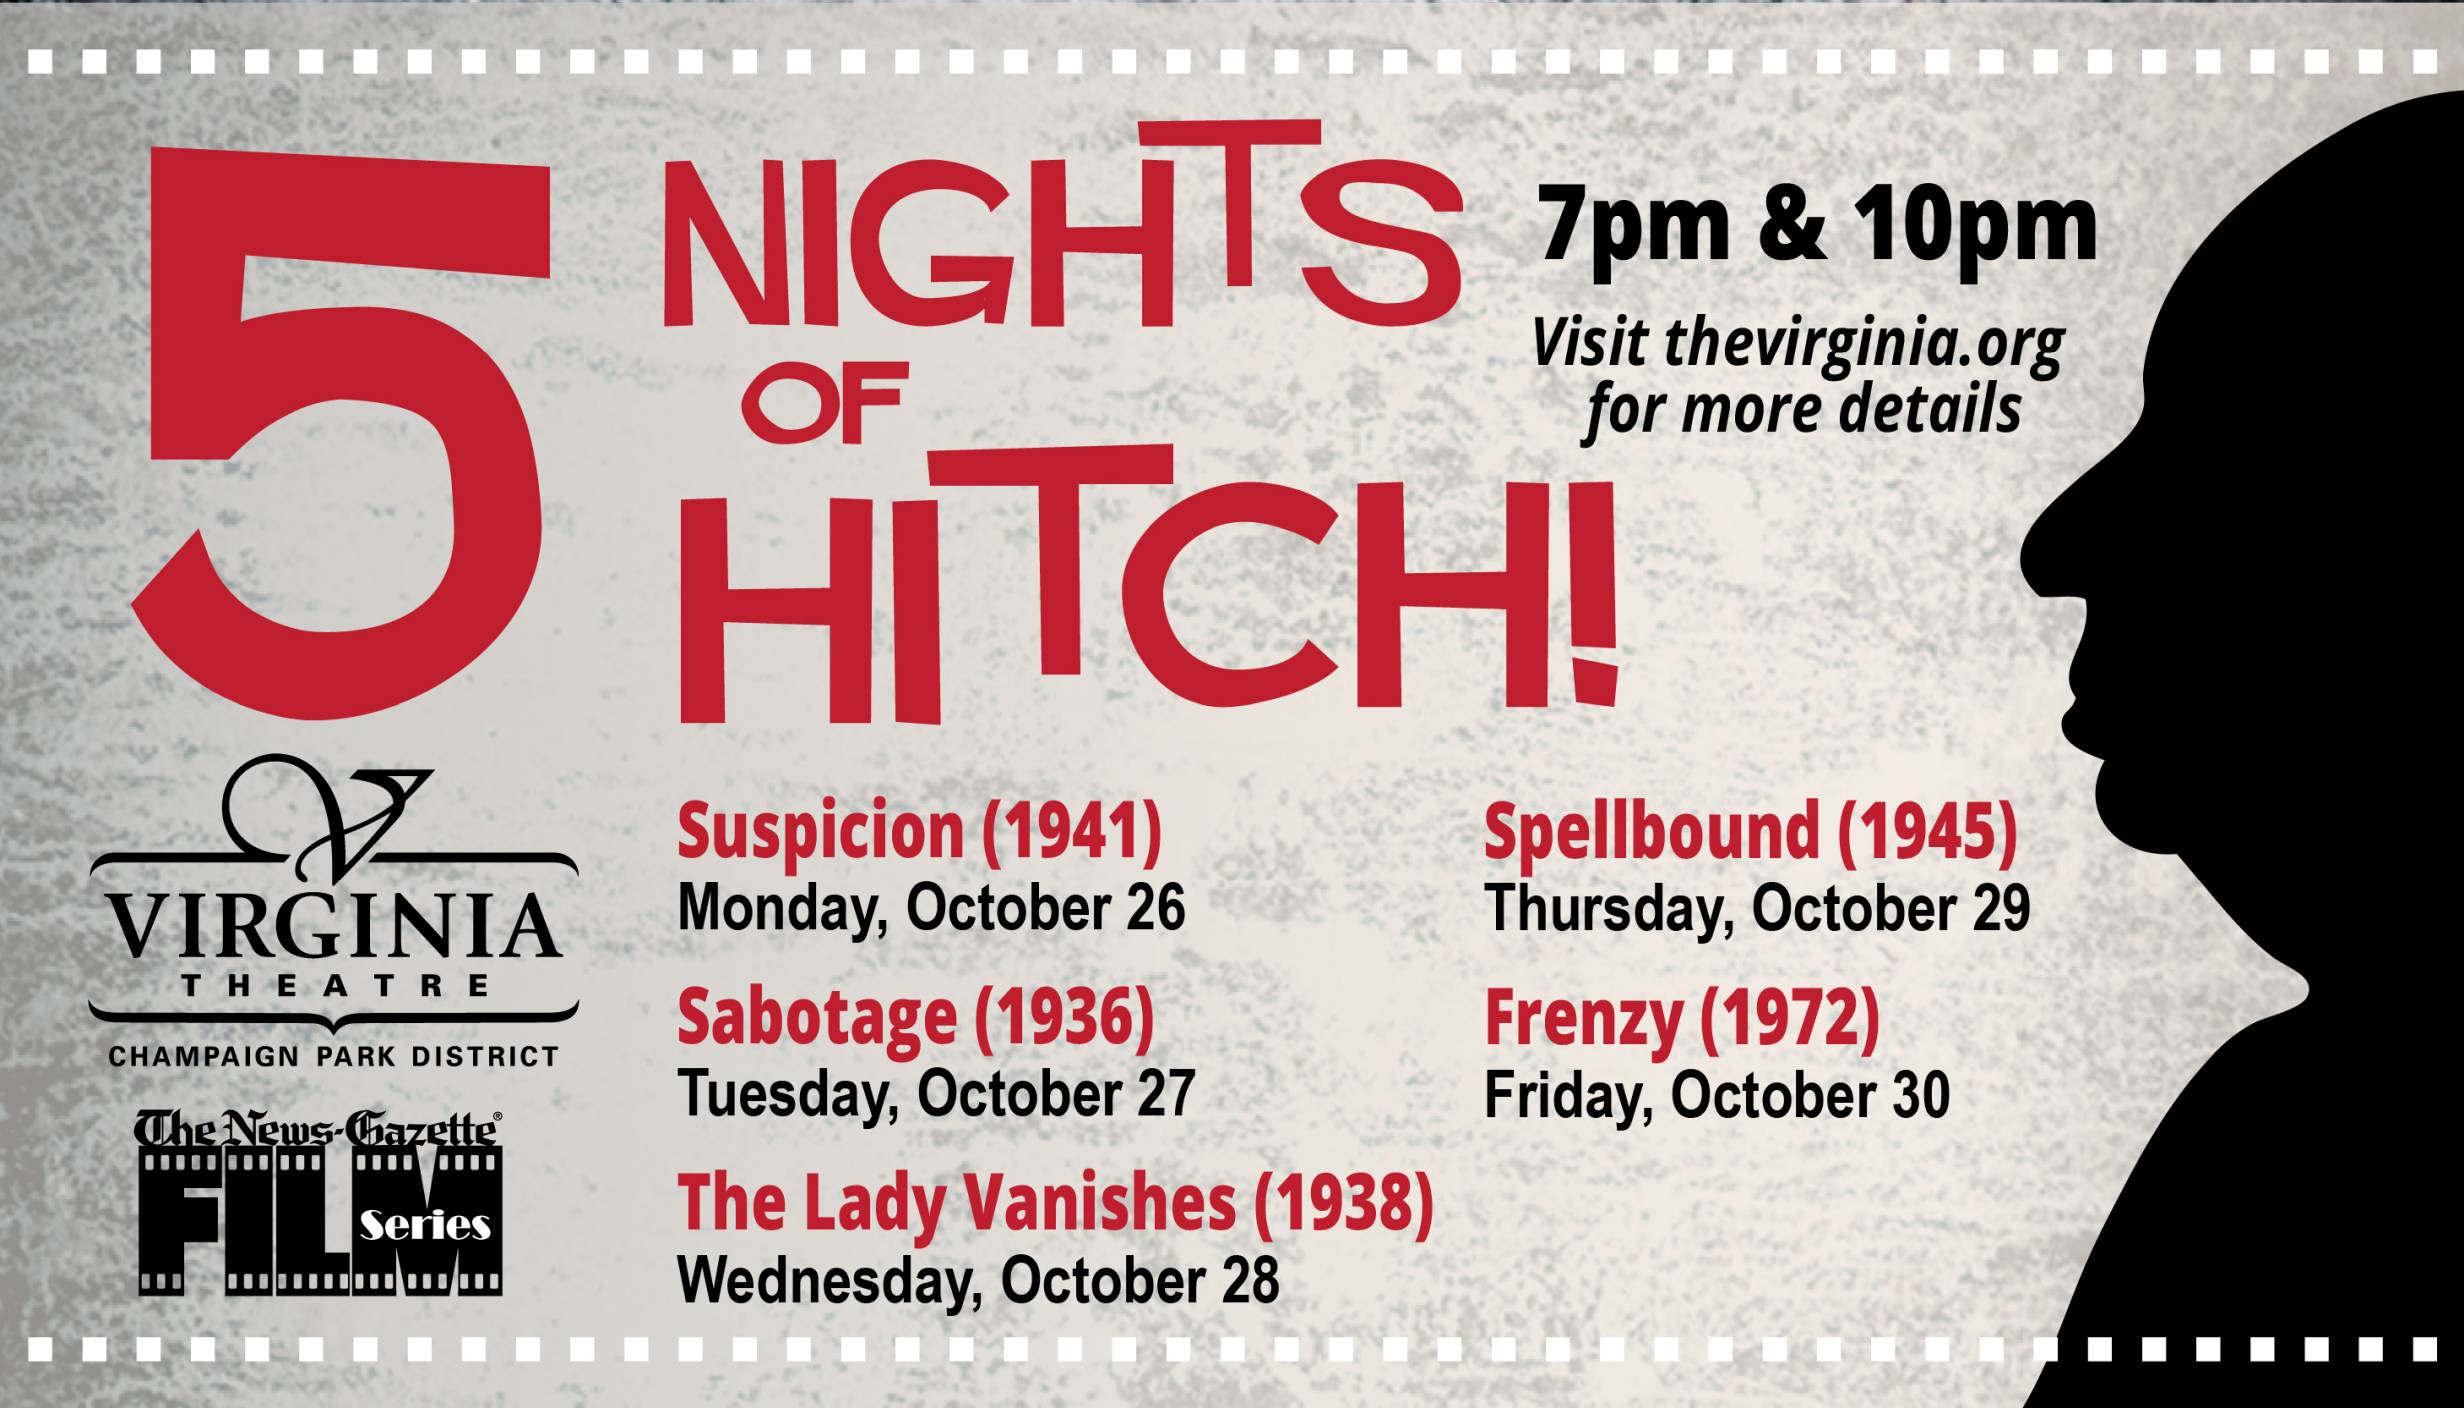 Champaign Park District presents 5 Nights of Hitch